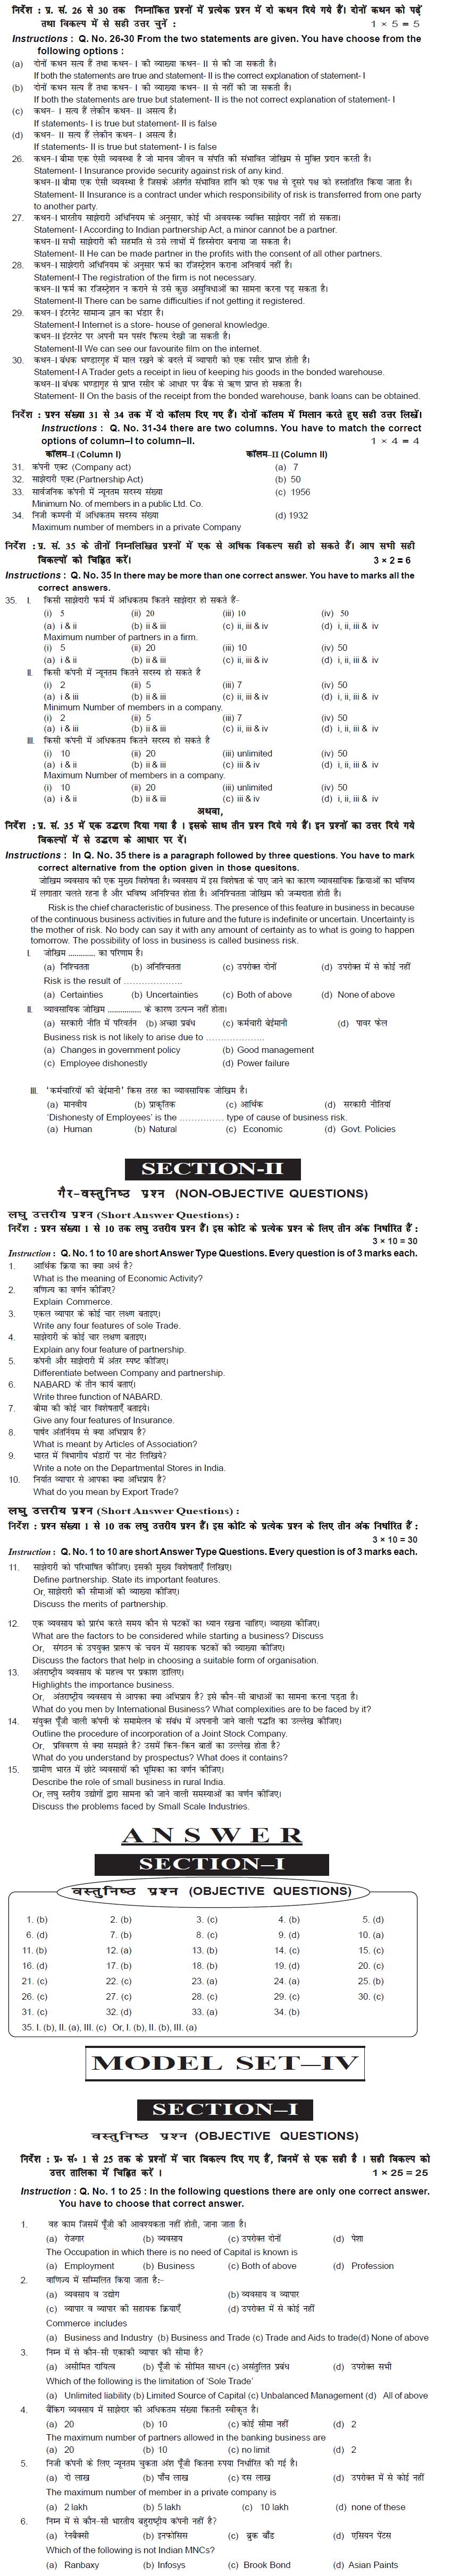 Bihar Board Class XI Commerce Model Question Papers - Business Study